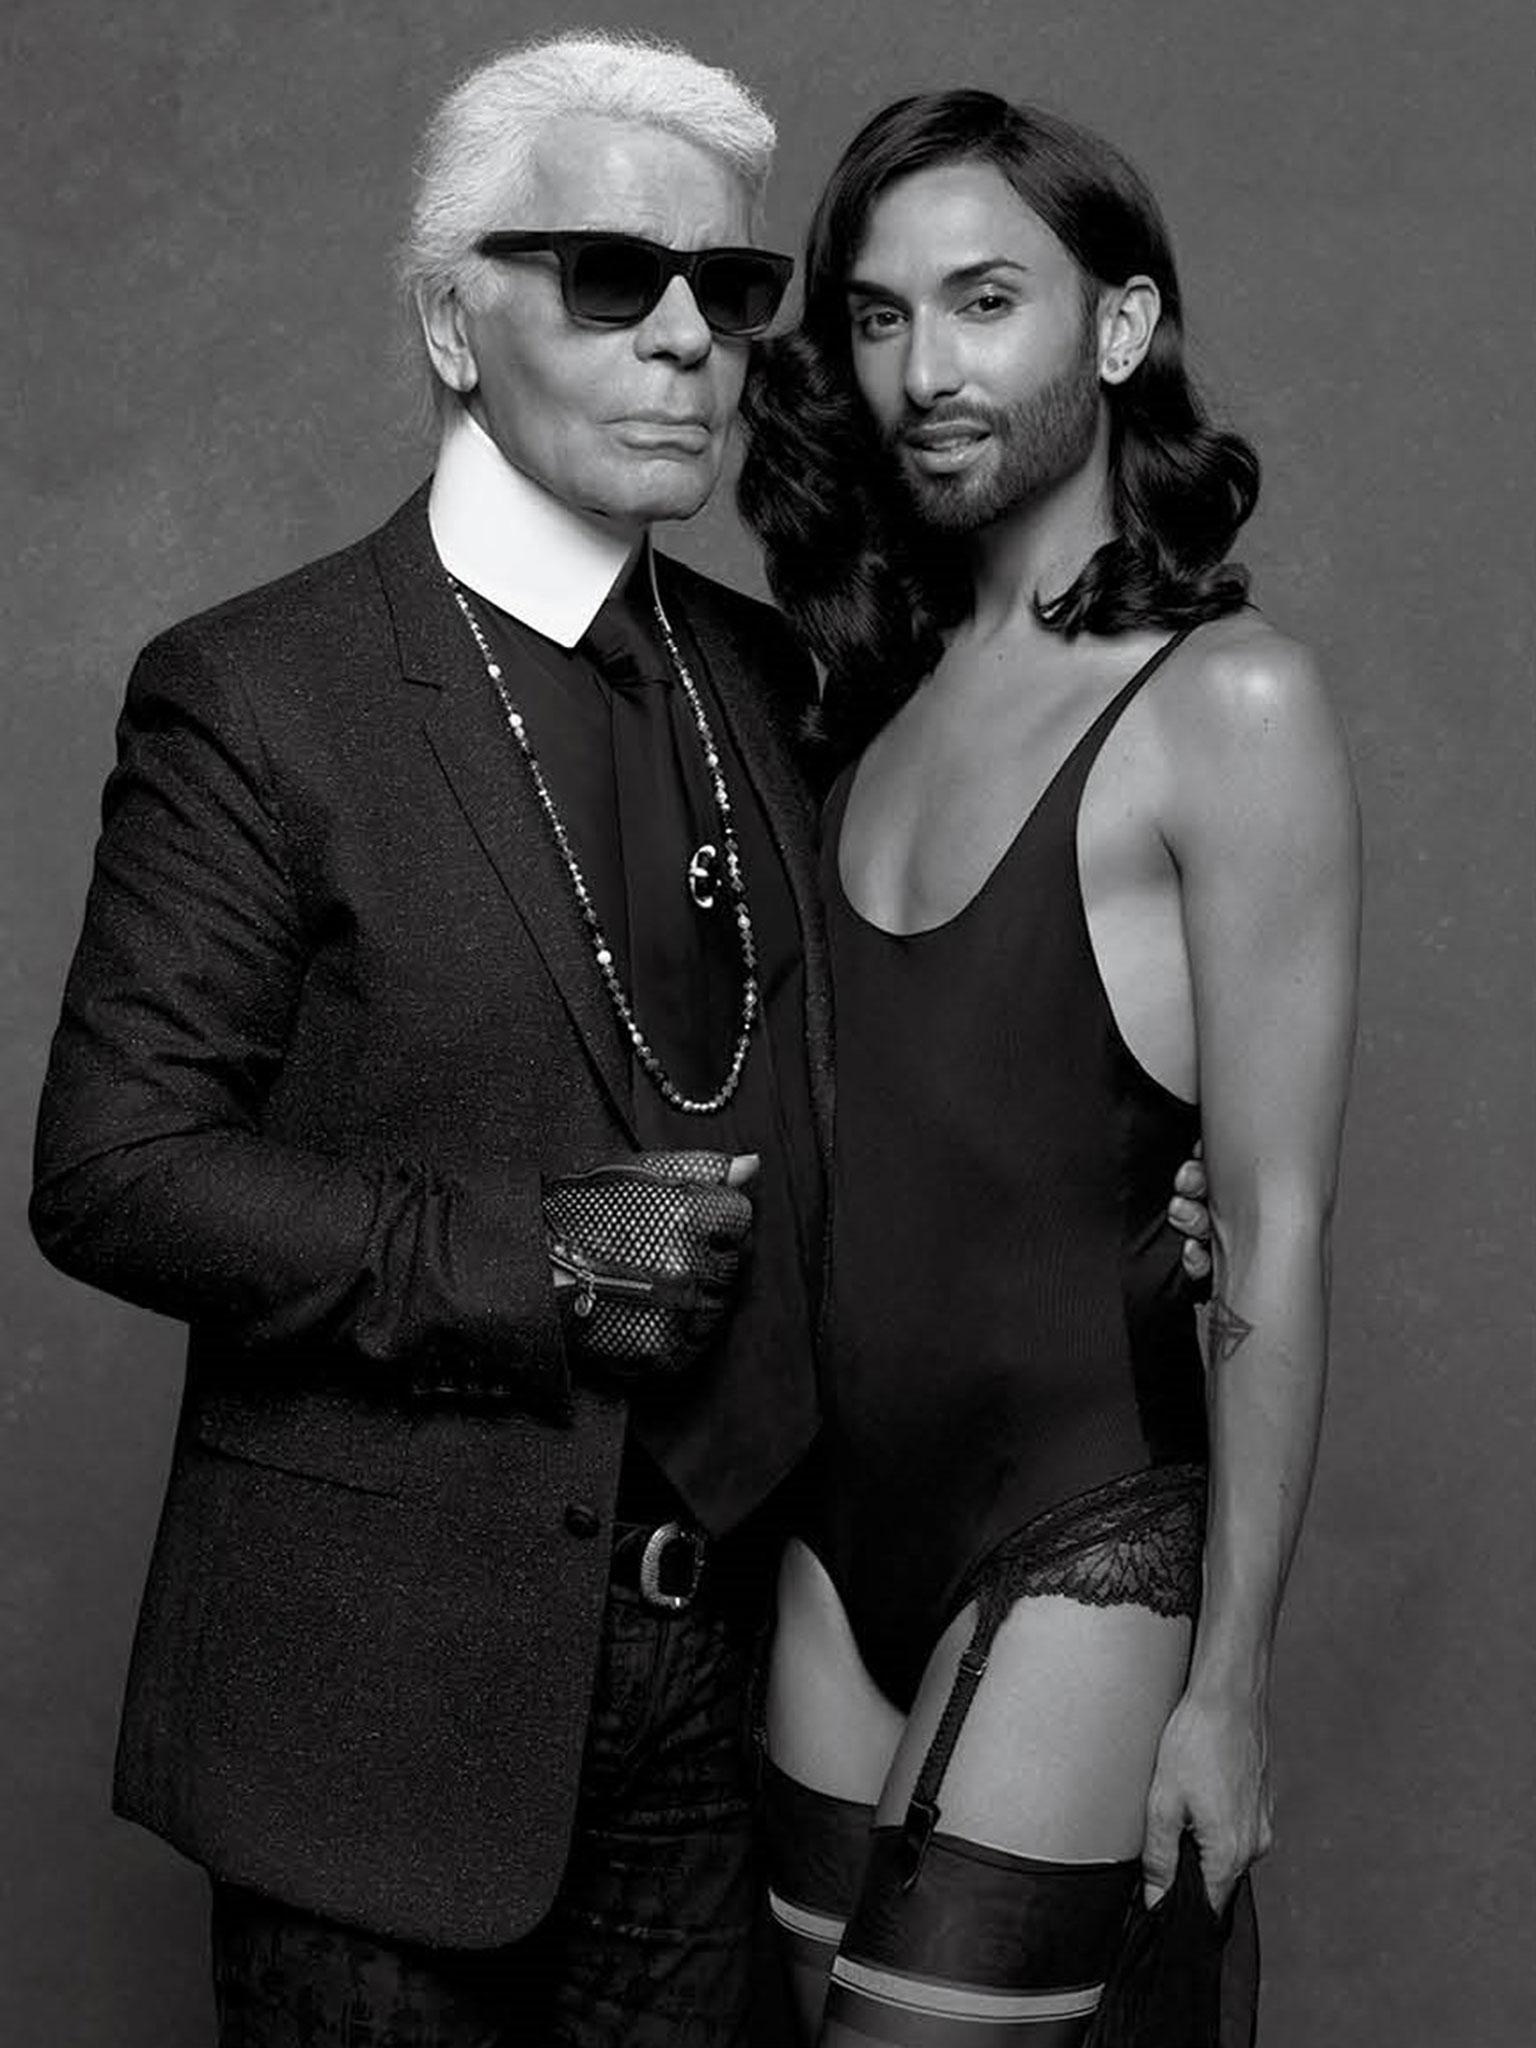 Karl Lagerfeld with Conchita Wurst during shoot for CR Fashion Book